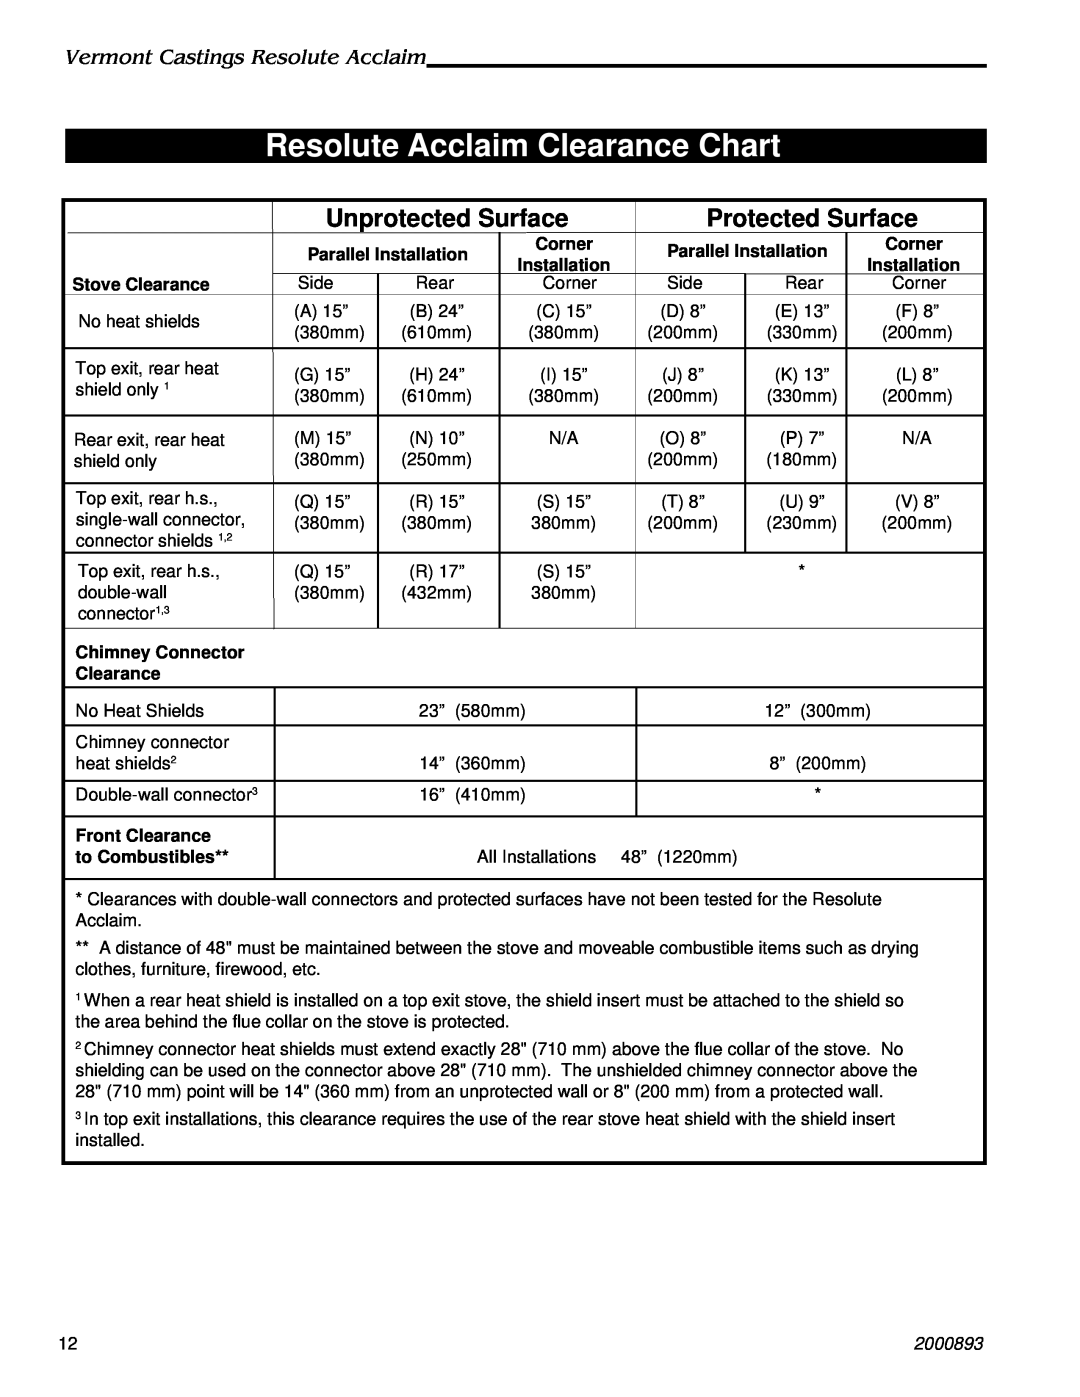 Majestic Appliances 2490 Resolute Acclaim Clearance Chart, Unprotected Surface, Protected Surface, 2000893 